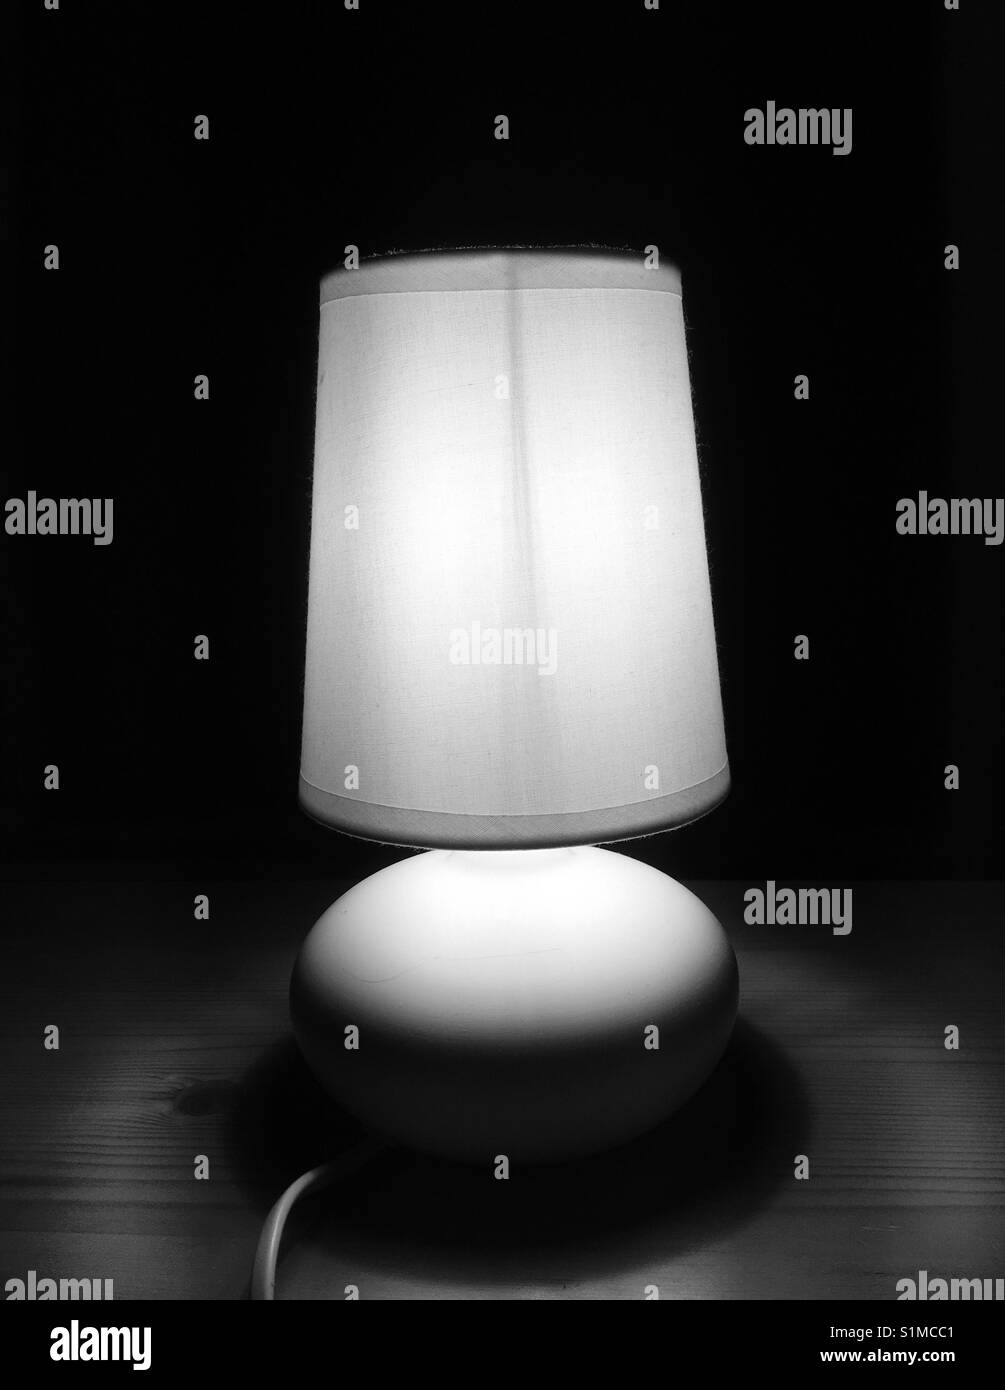 Night lamp on wooden nightstand black and white Stock Photo